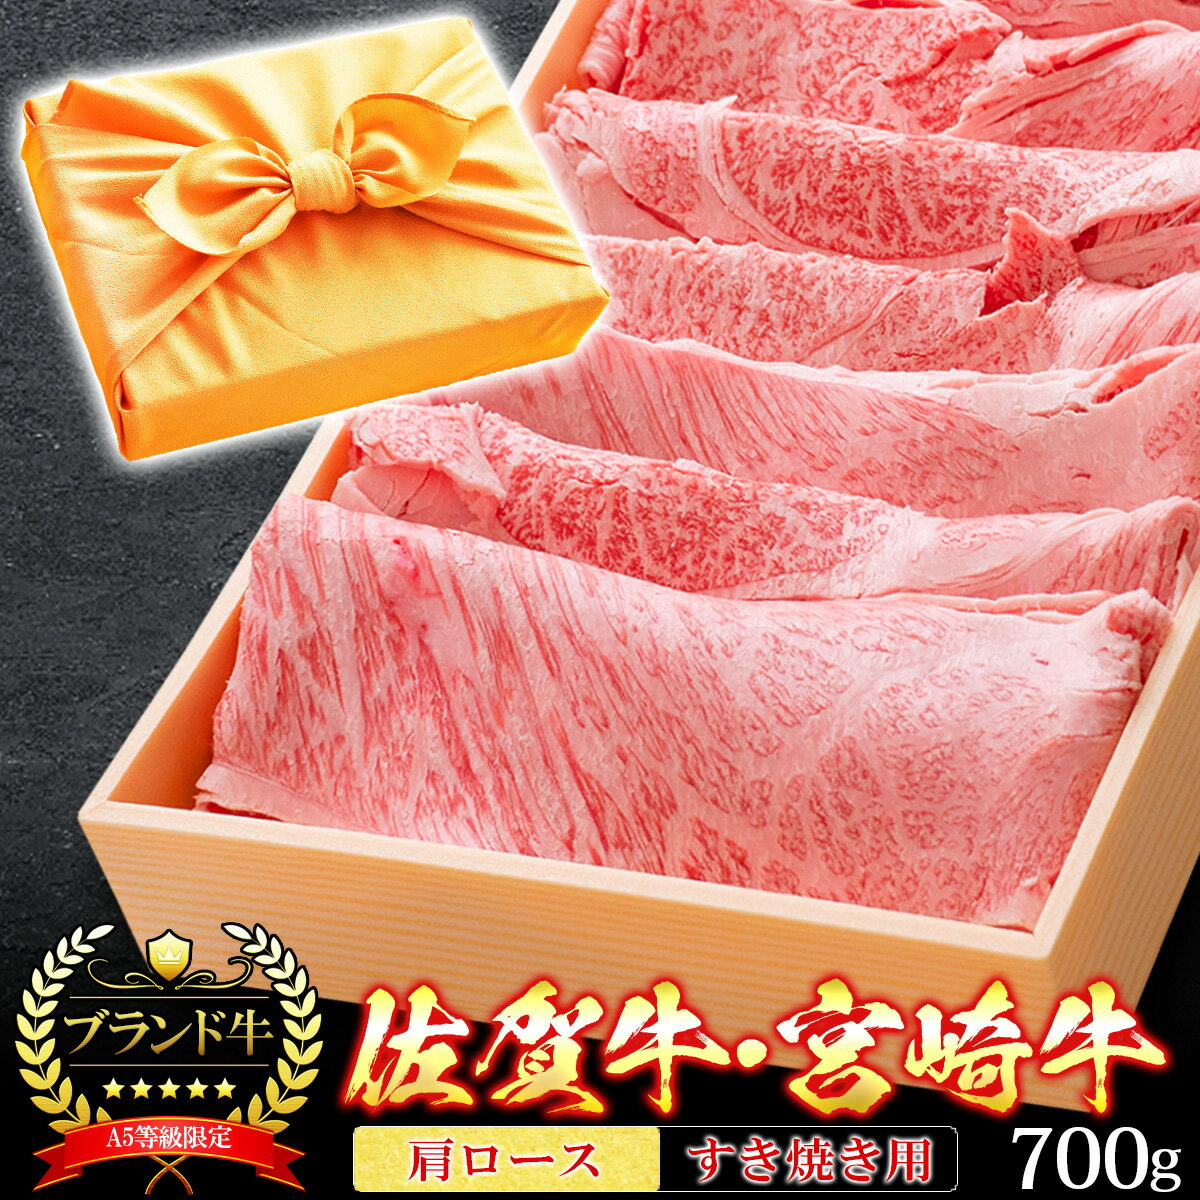  N[|p15%OFF  ̓ C~ Mtg   {苍 ꋍ A5N [X Ă 700g NV^ A5  ԂԂ a јa a j v[g